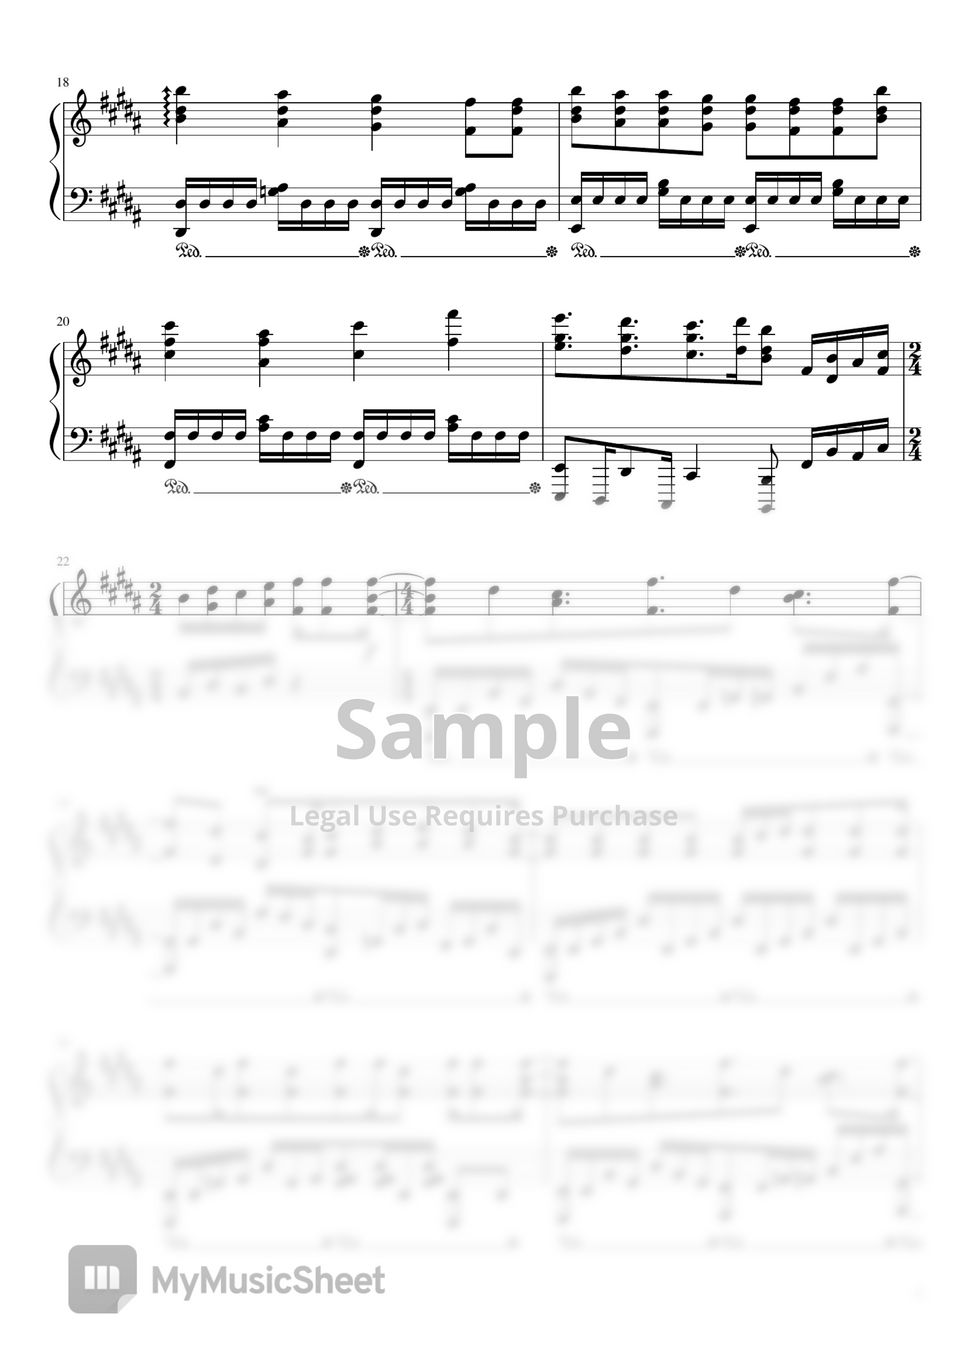 Gt&Vo - FLY HIGH!! (Haikyuu!! Season 2 OP 2 - For Piano Solo) Sheets by poon